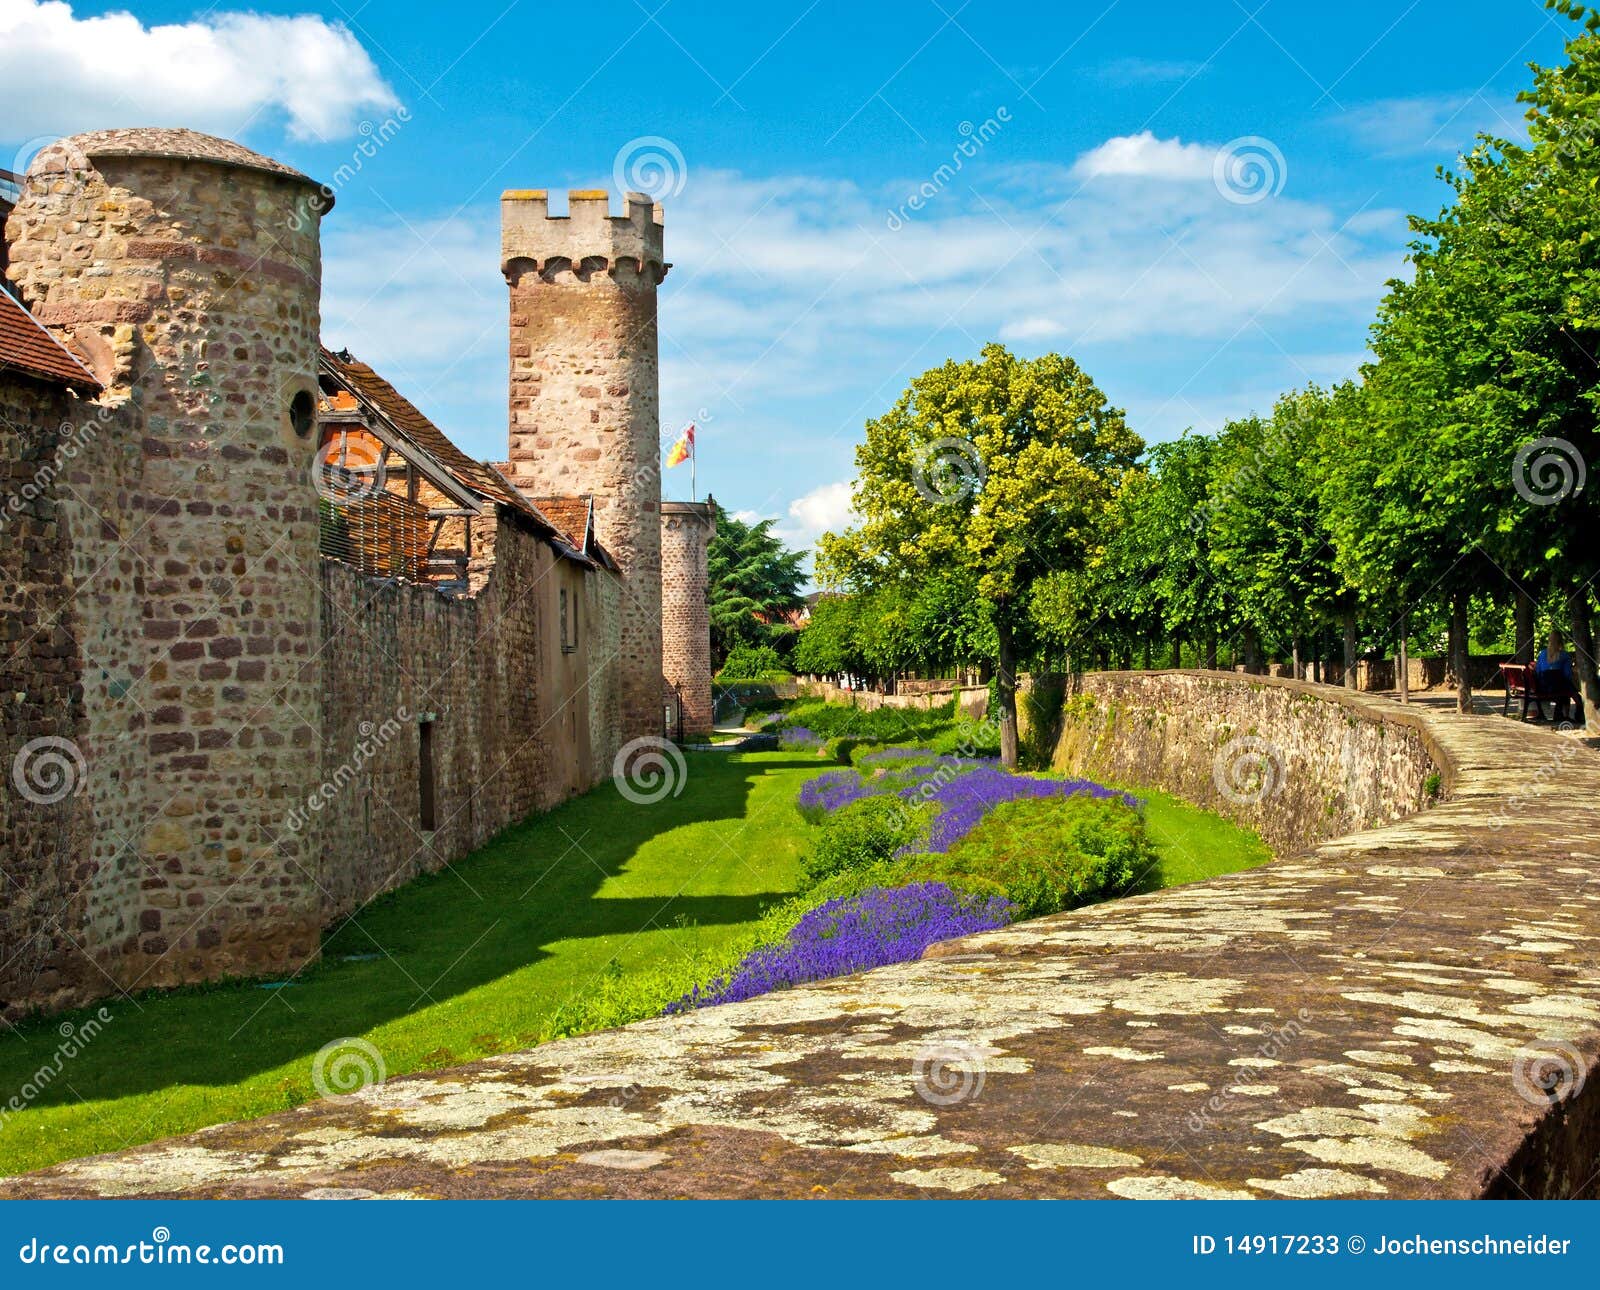 citywall in france